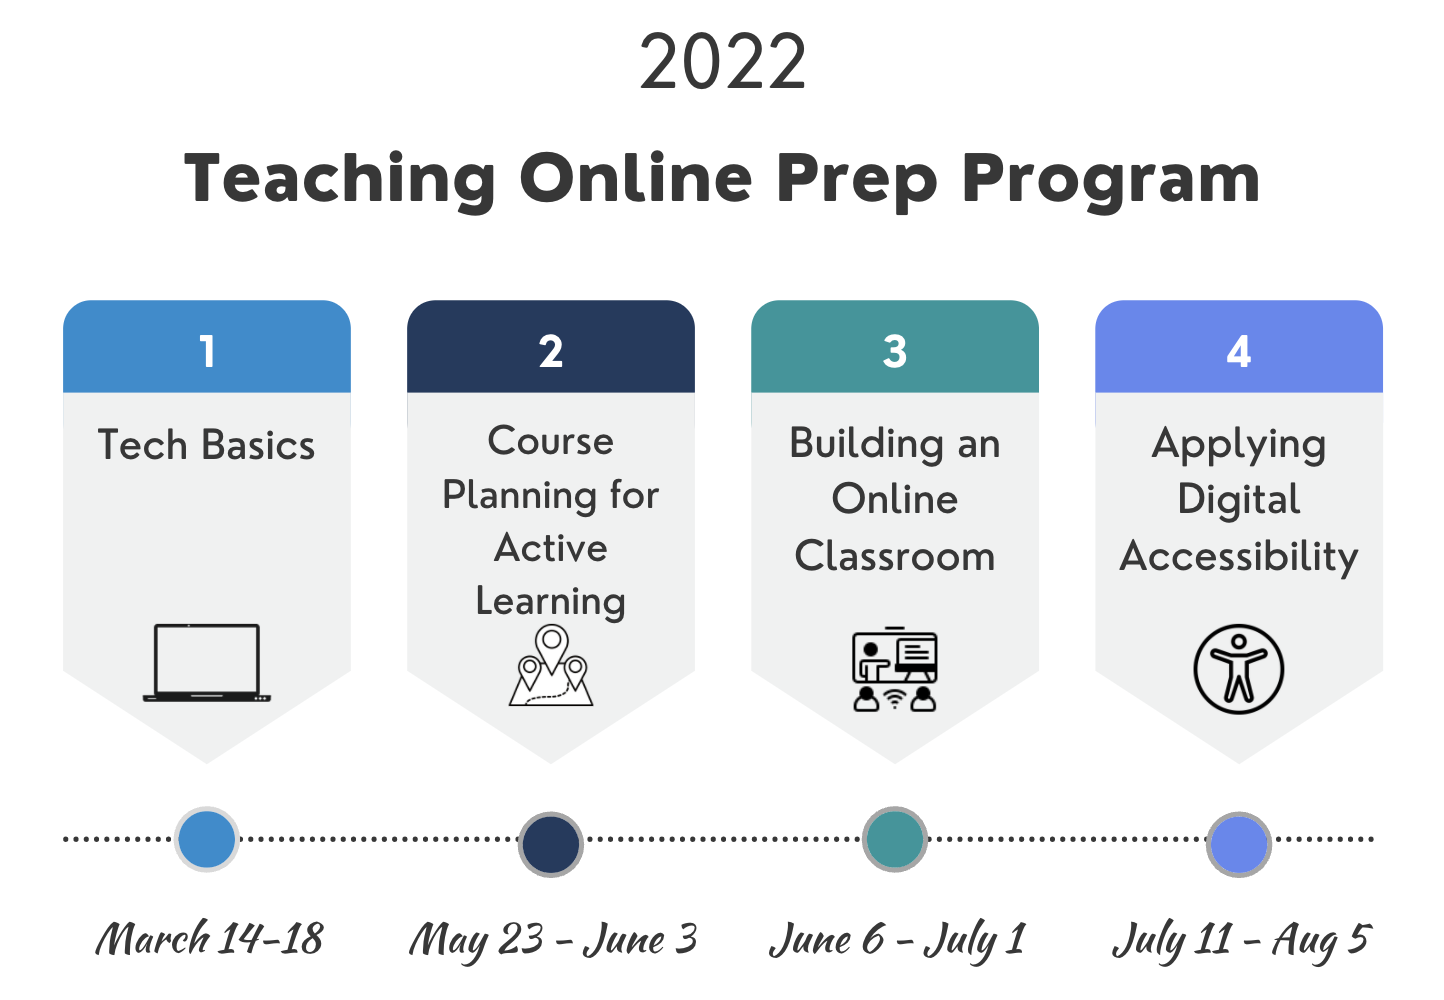 4 modules of TOPP in 2022.